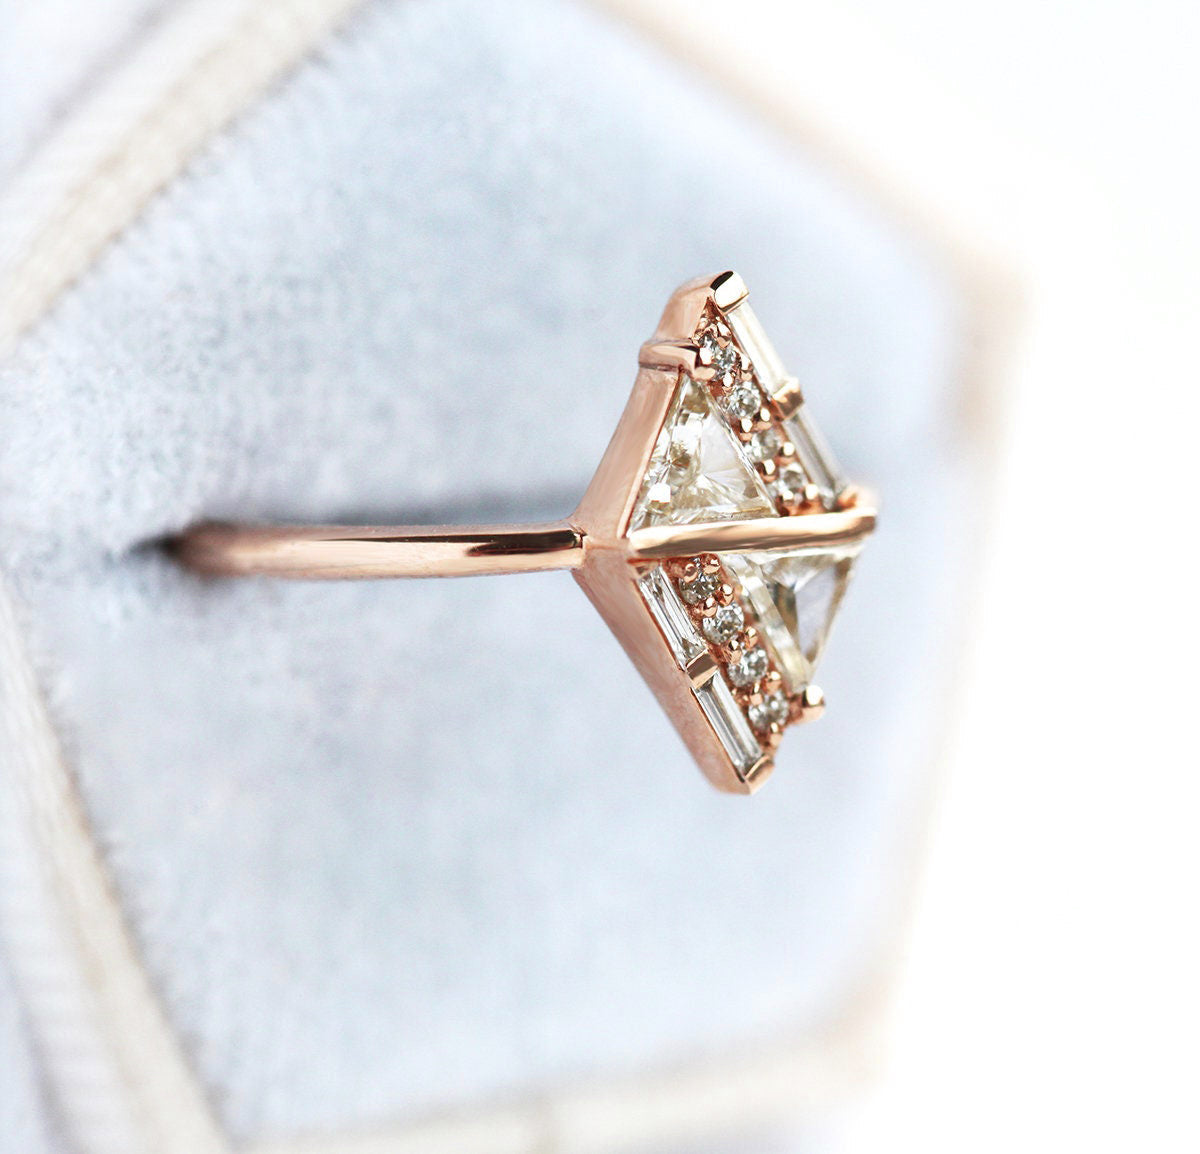 Art Deco inspired White Diamond Ring, with Triangle, Round and Baguette Cut Diamonds forming altogether a triangle shape